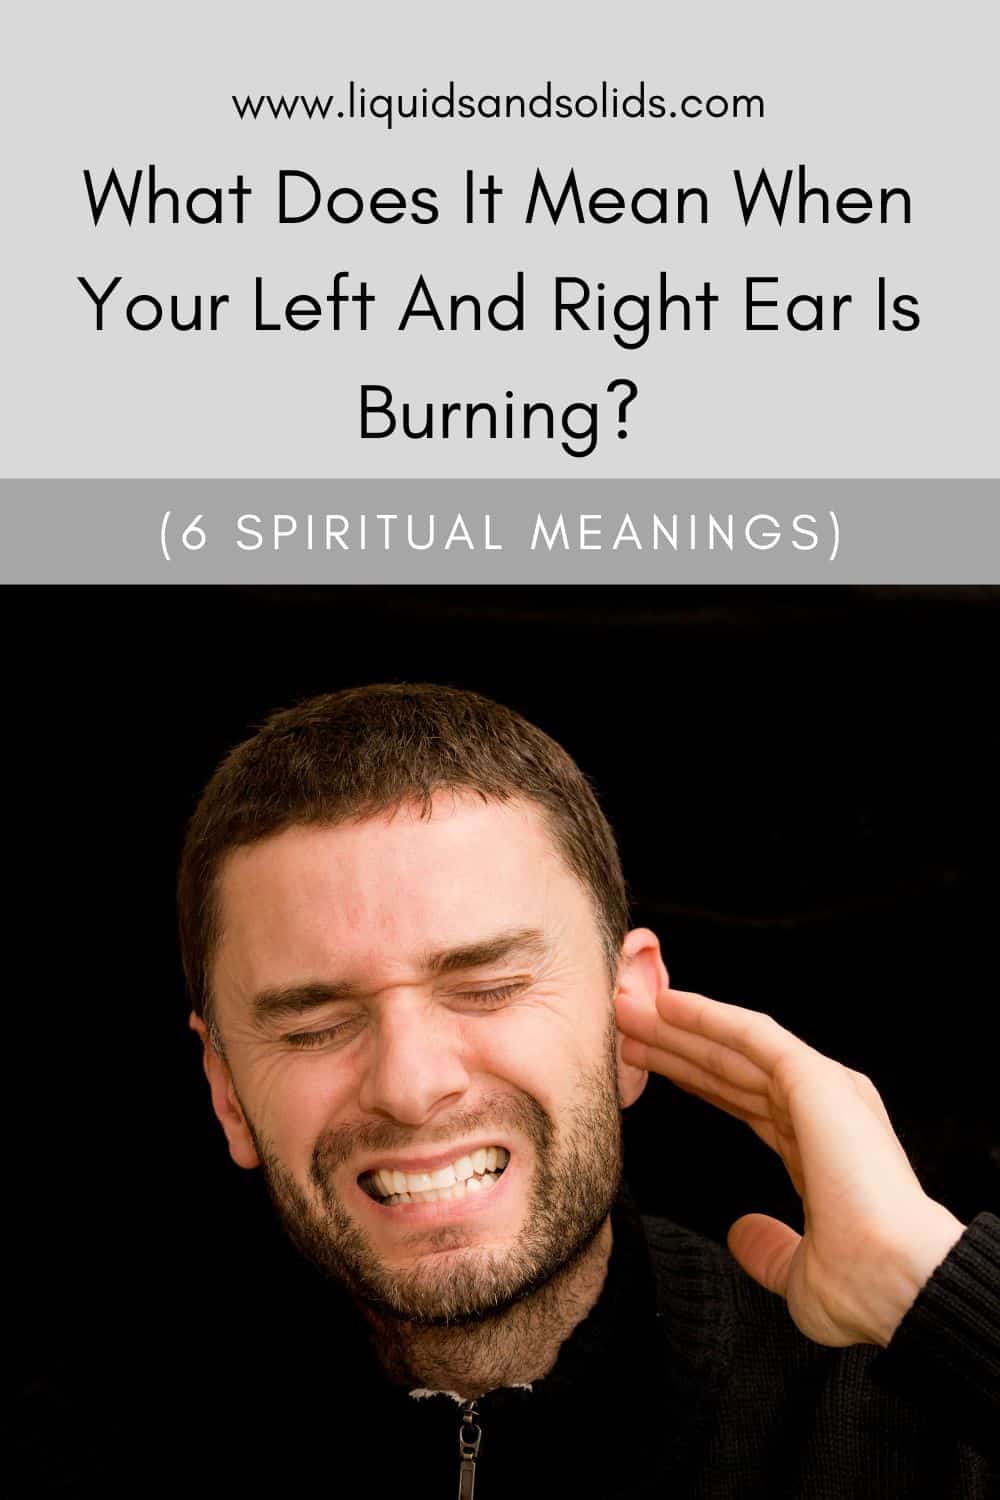 What Does It Mean When Your Left And Right Ear Is Burning? (6 Spiritual Meanings)